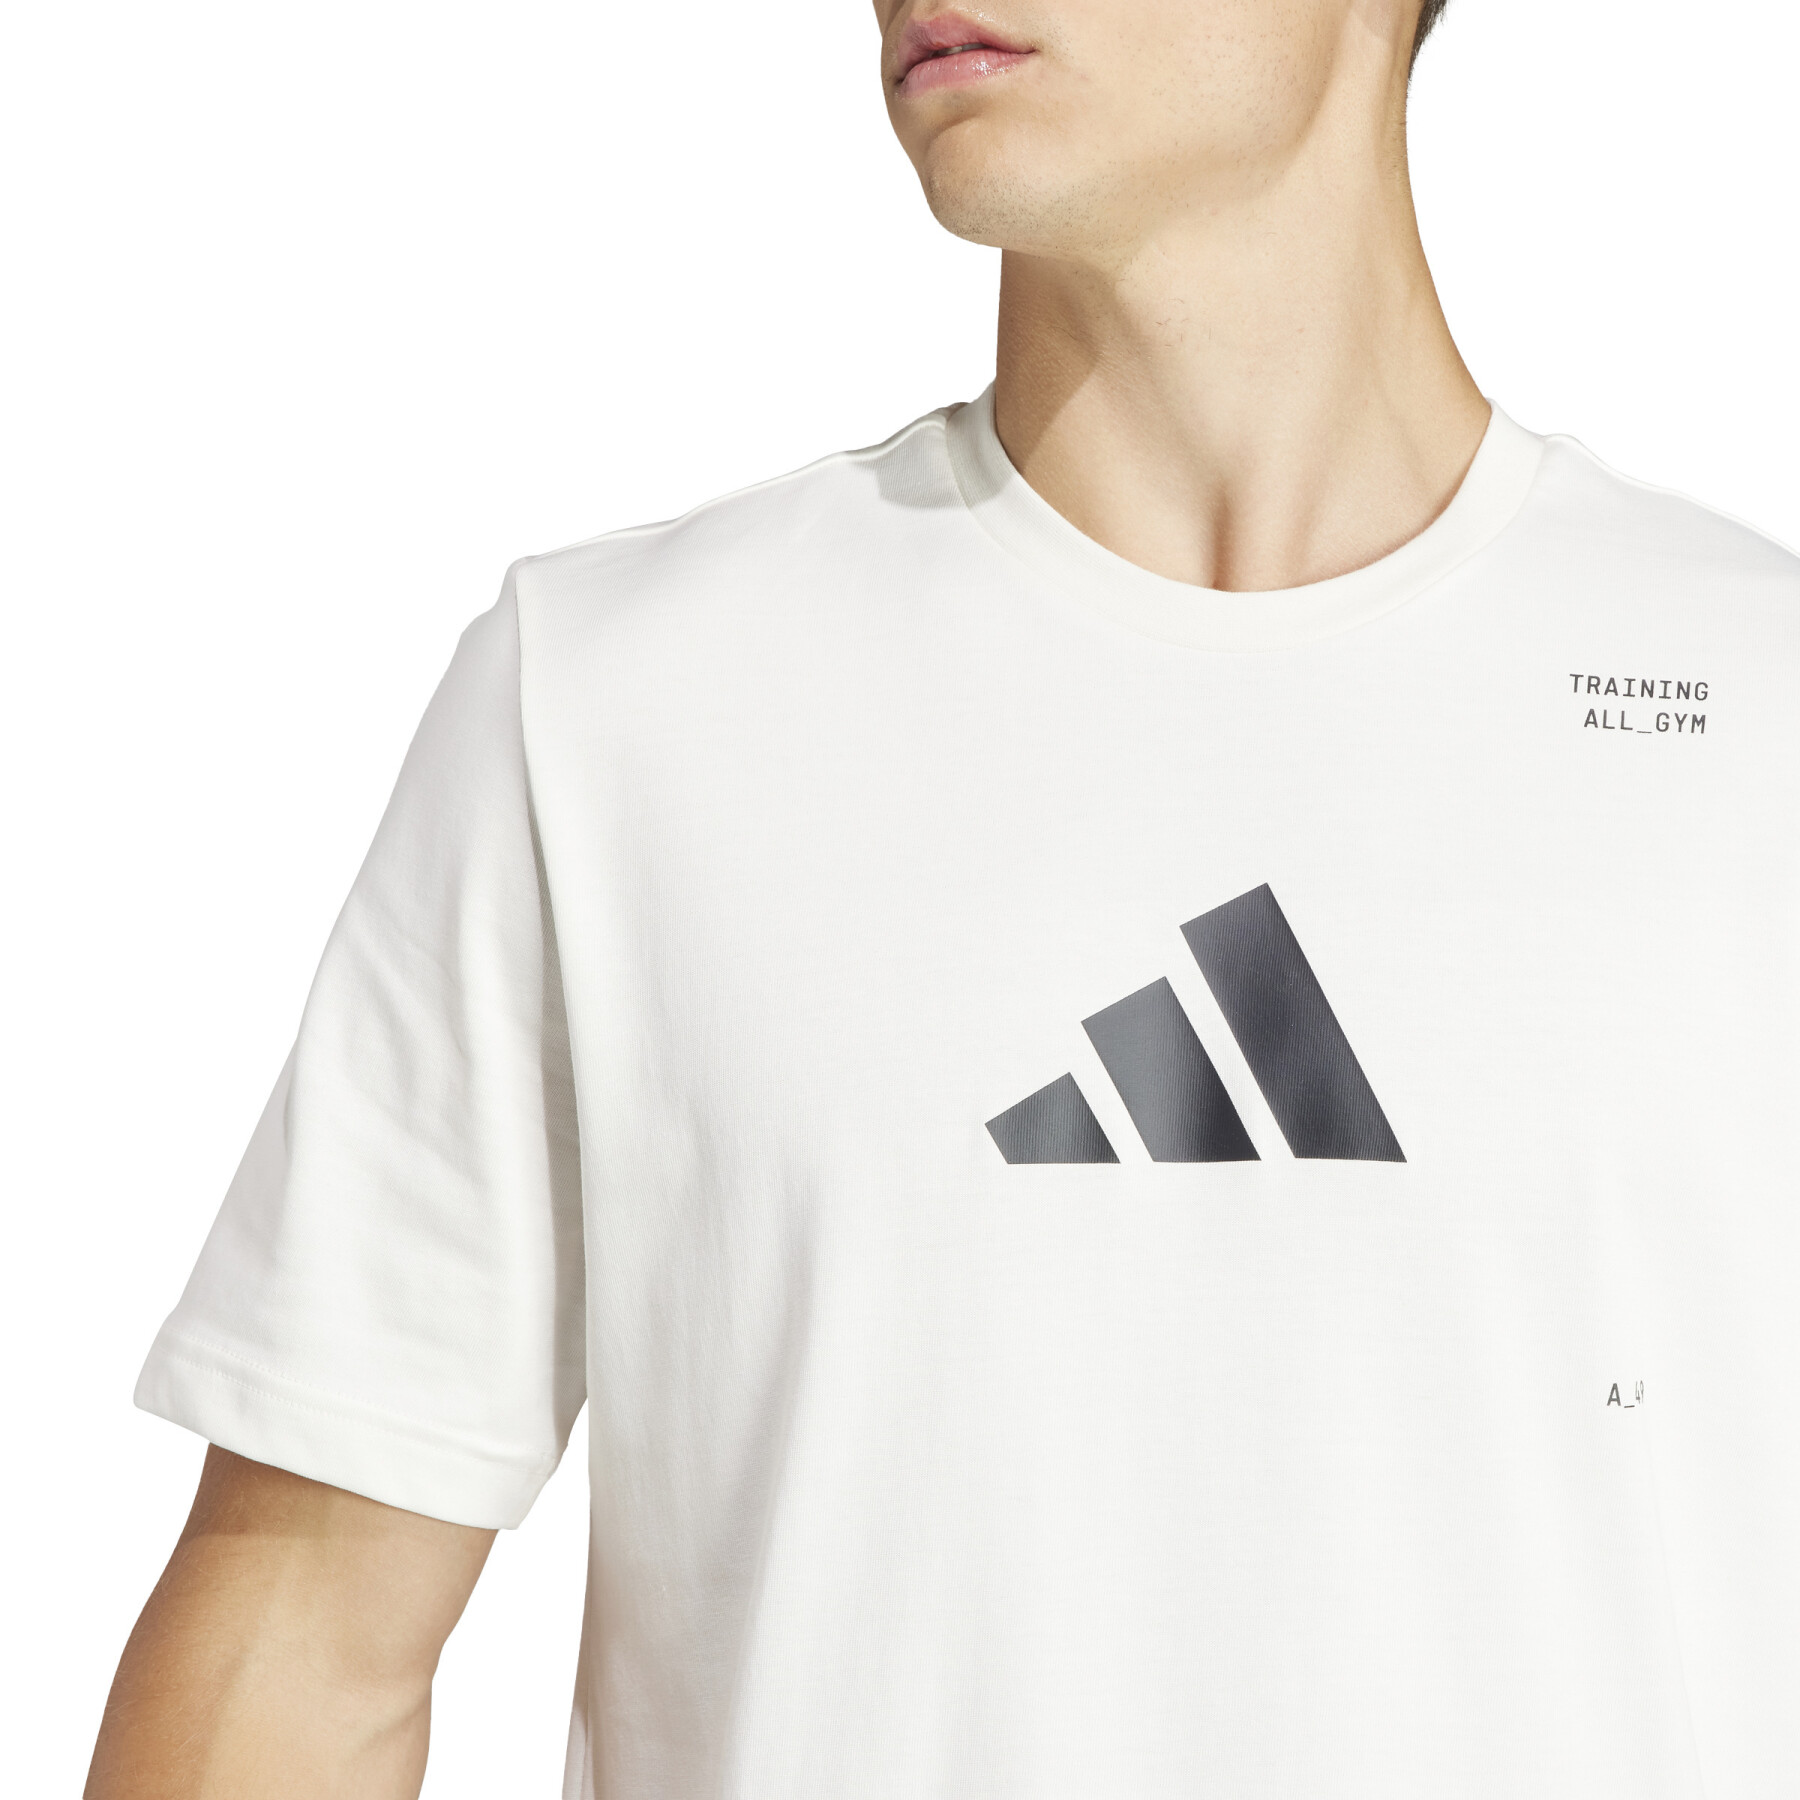 T-Shirt adidas All Gym Category Graphic